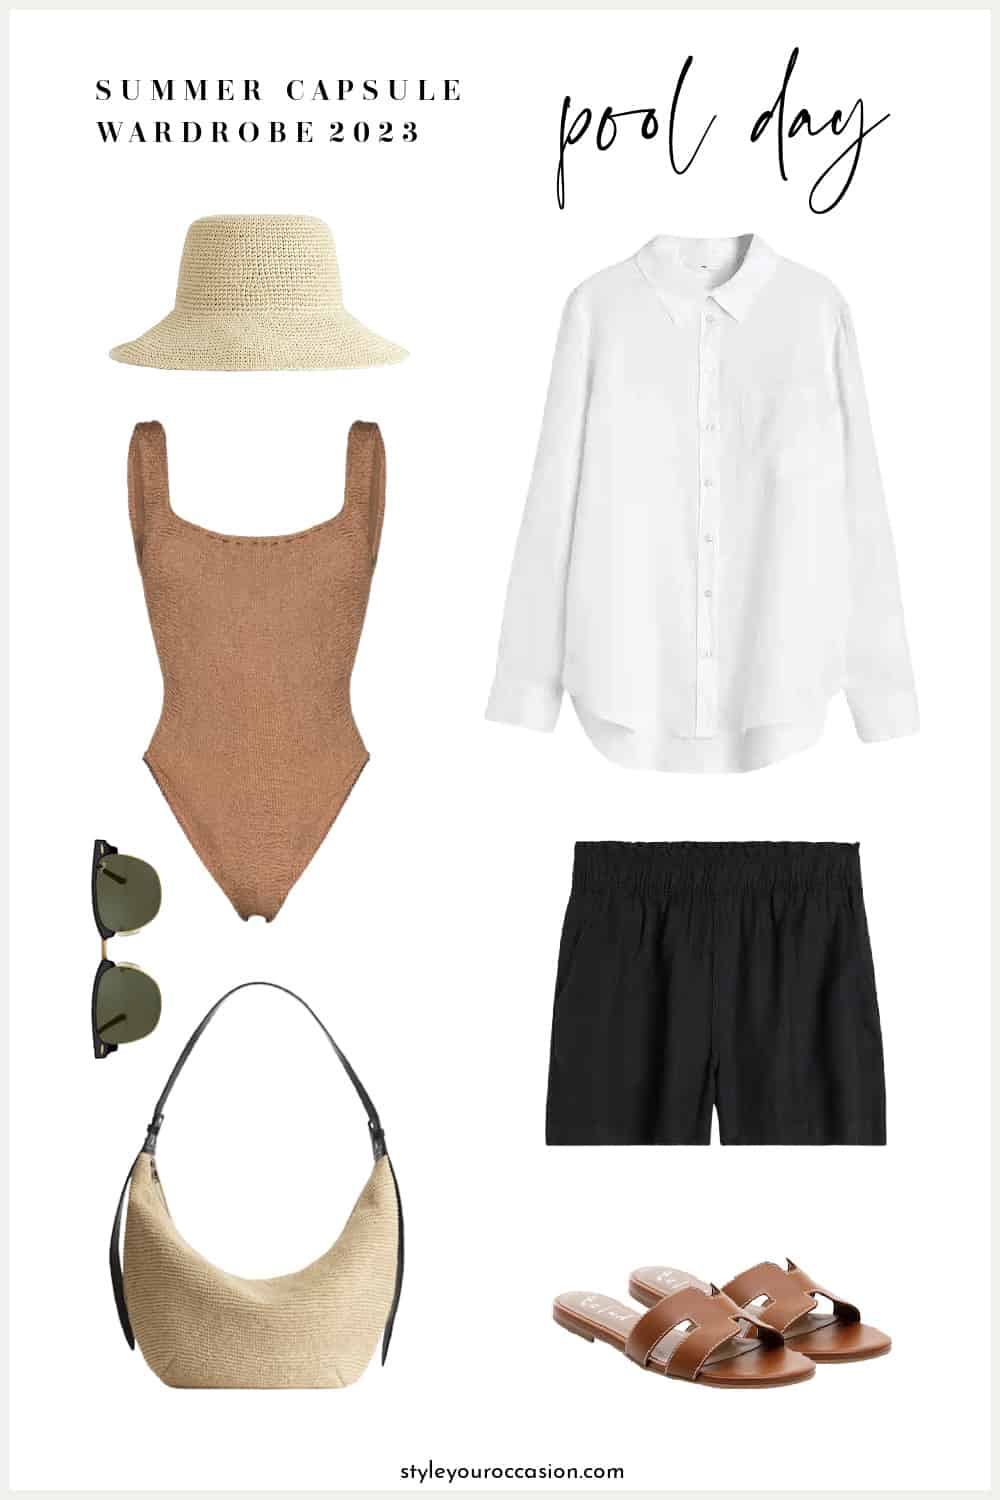 outfit mood board for a summer capsule wardrobe with a brown one-piece swimsuit, raffia bucket hat, white button down shirt, black linen shorts, straw tote, sunglasses, and brown sandals